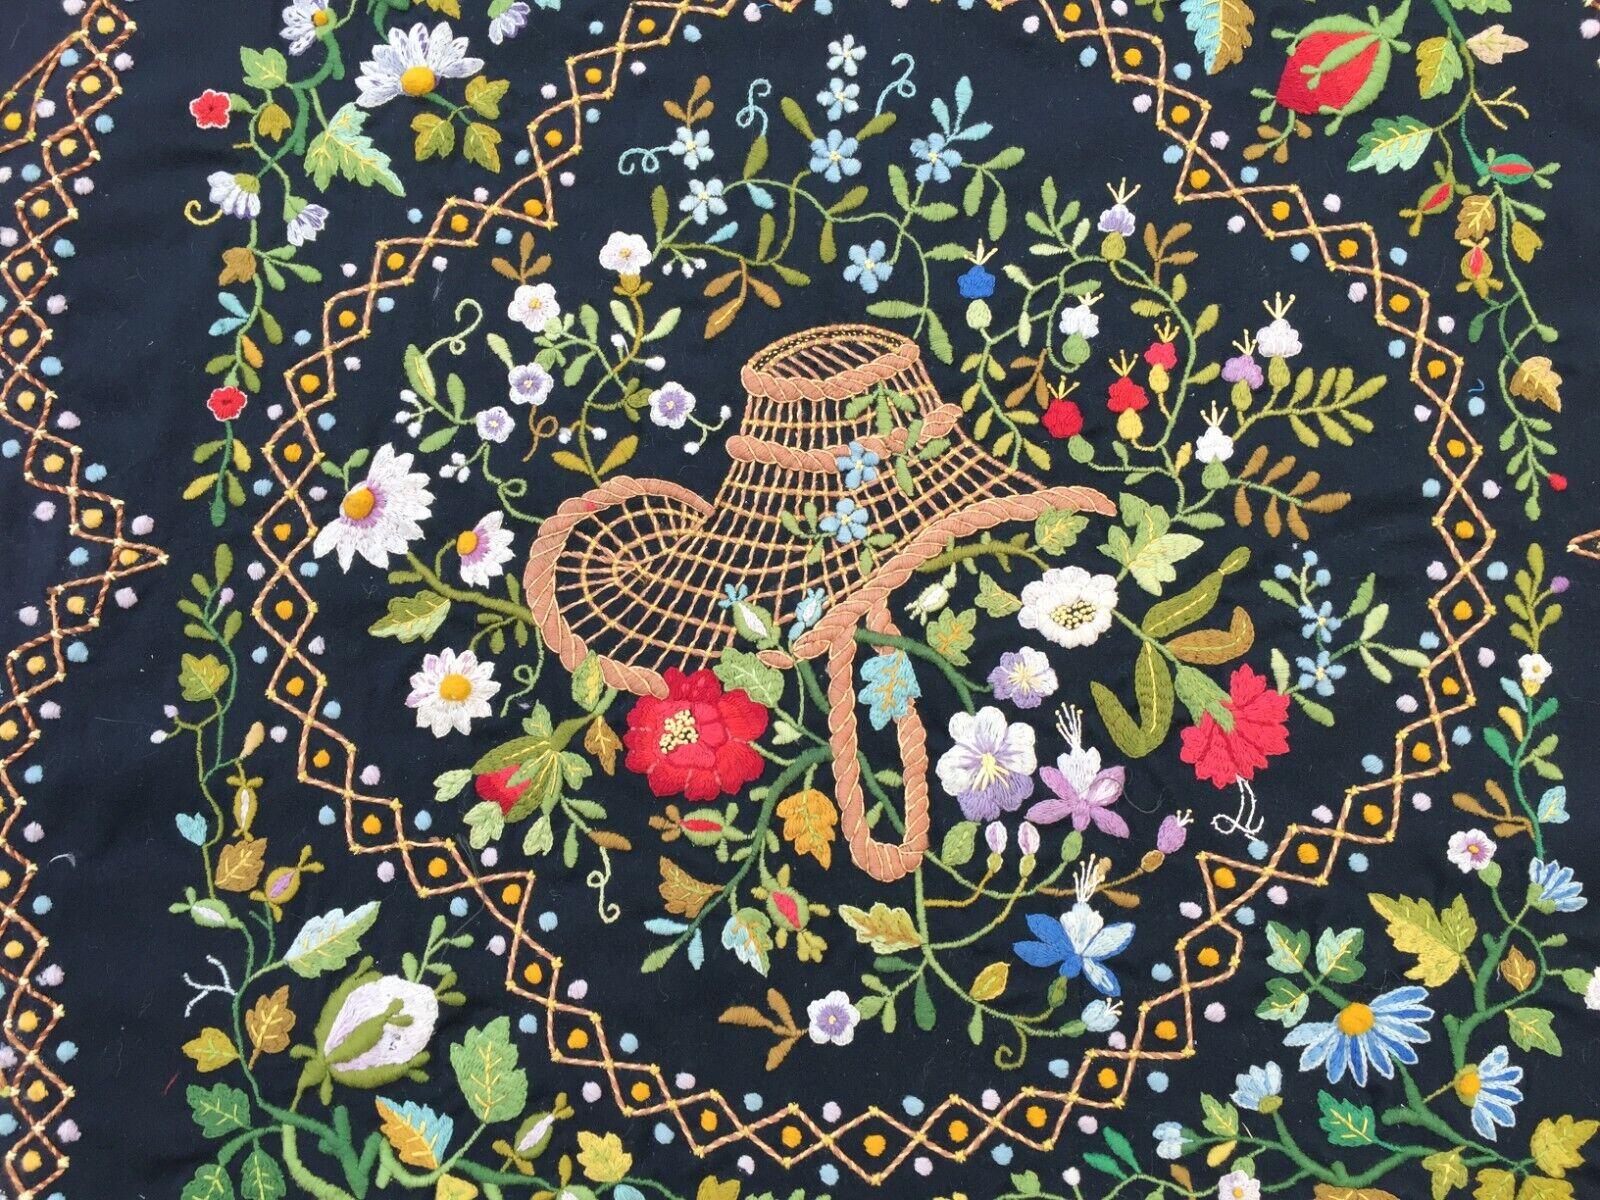 Handmade Antique French Needlepoint Rug 4.1' x 5.5', 1900s - 1W10 In Good Condition For Sale In Bordeaux, FR